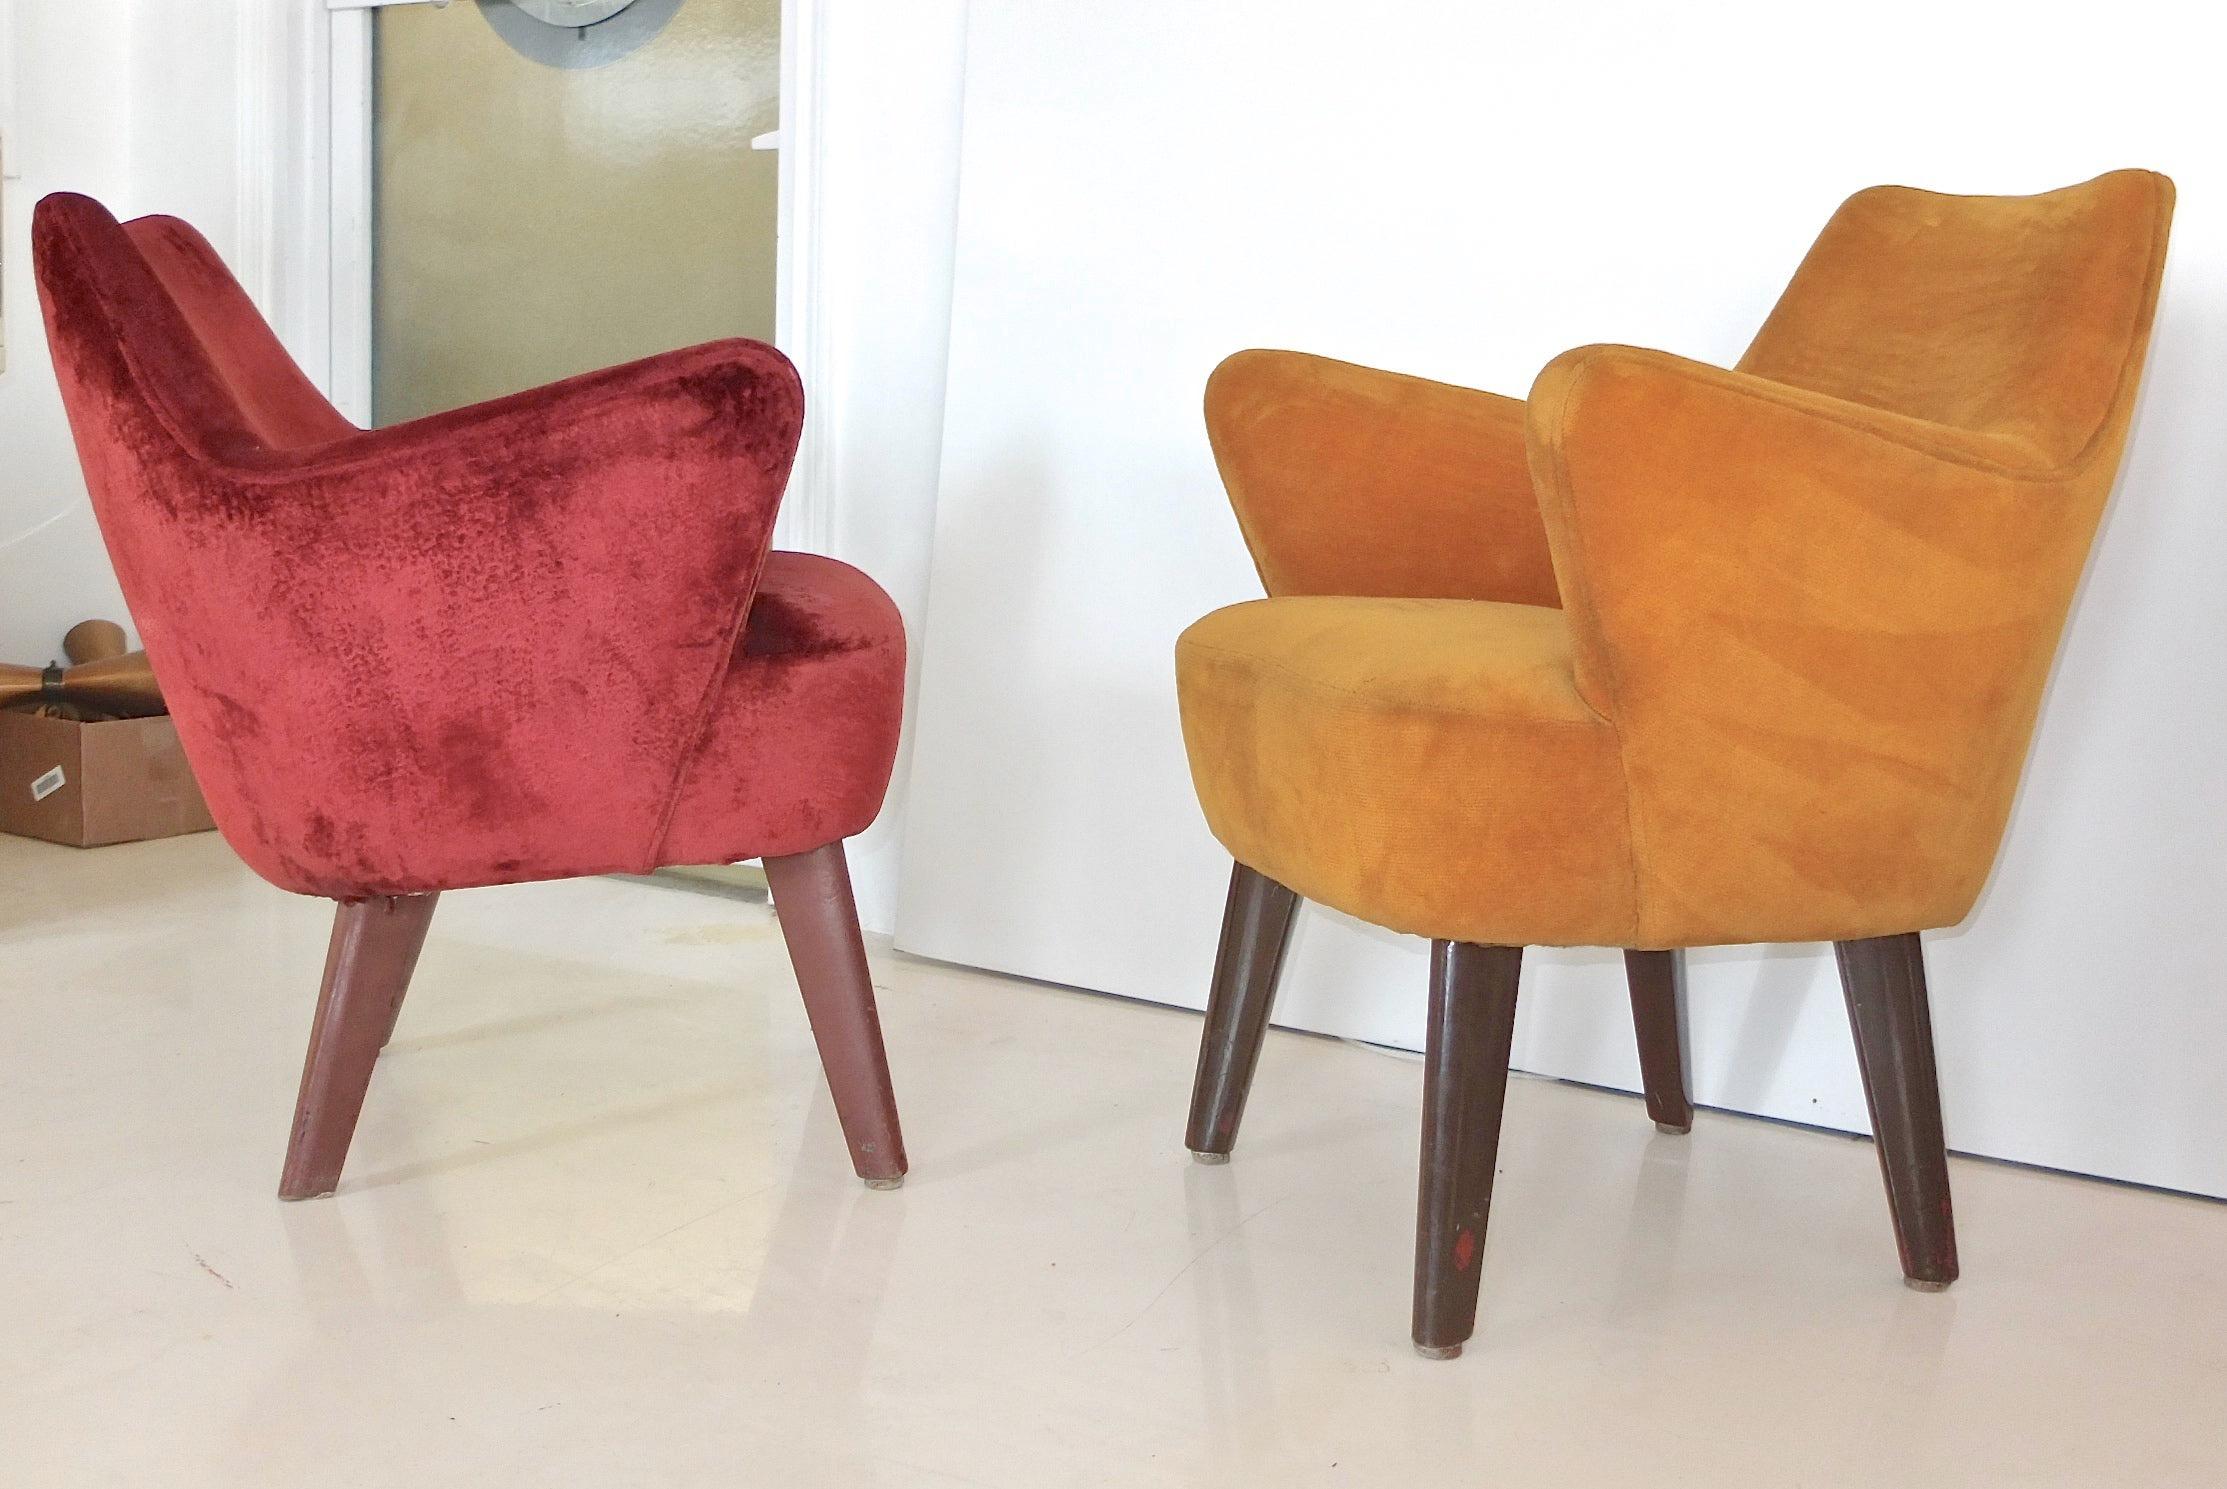 Gio Ponti Chairs from Augustus Ocean Liner - Pairs X3 For Sale 6